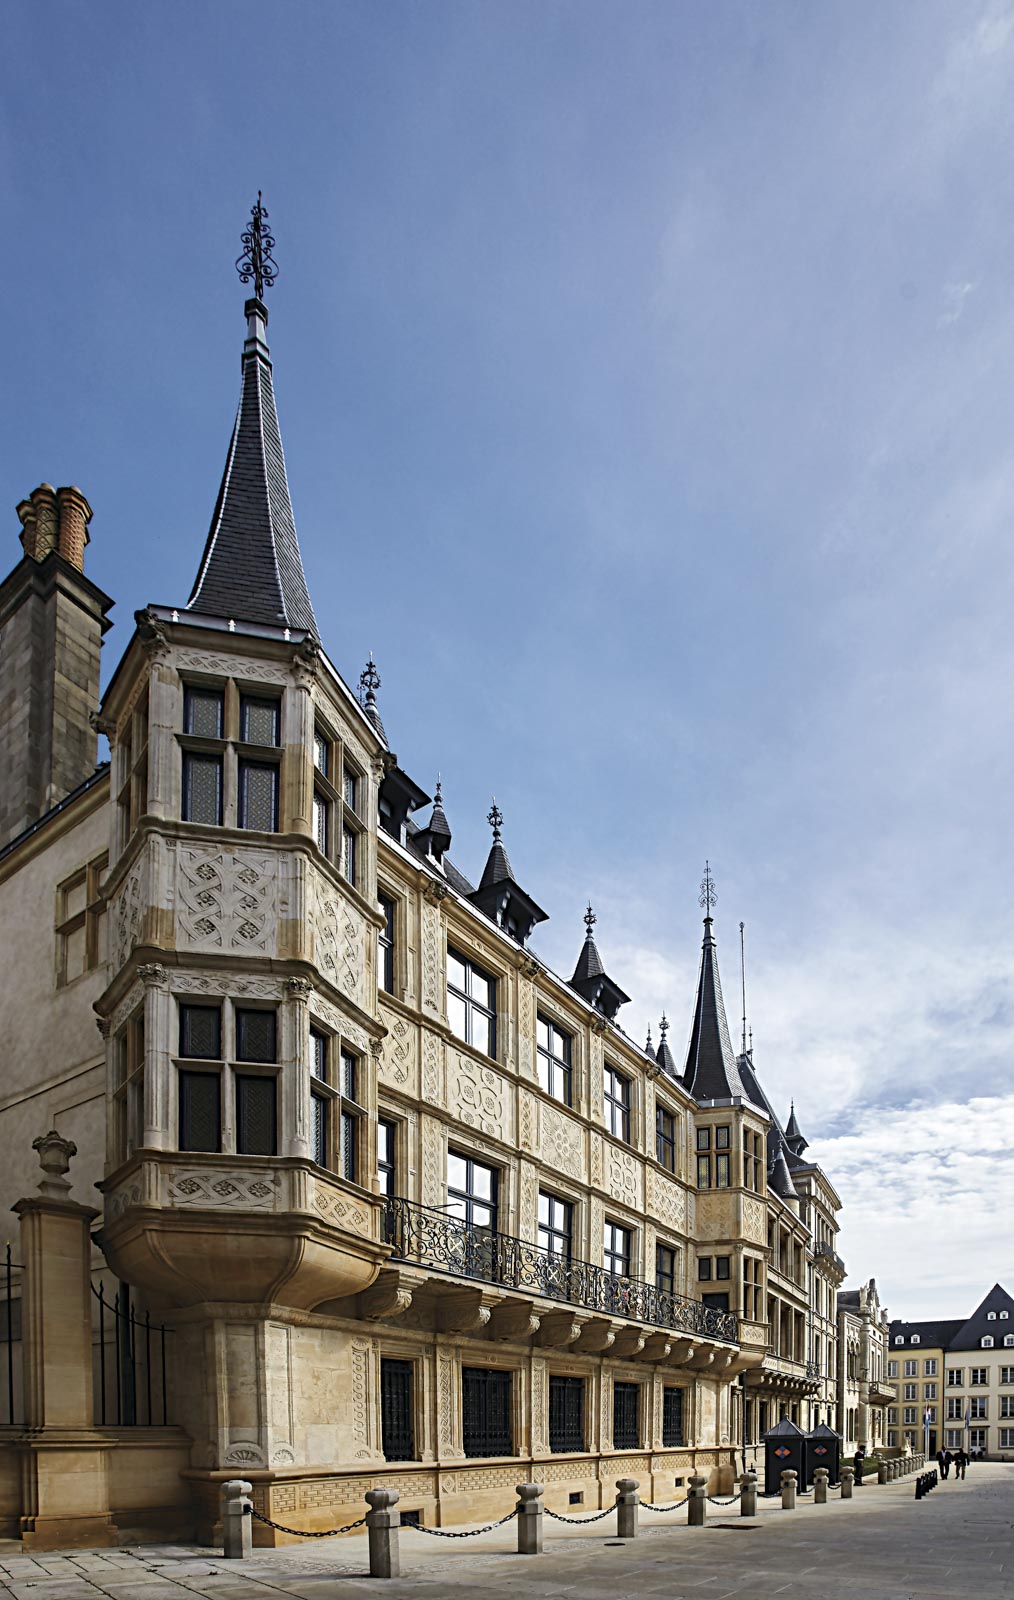 Grand-ducal Palace in Luxembourg City